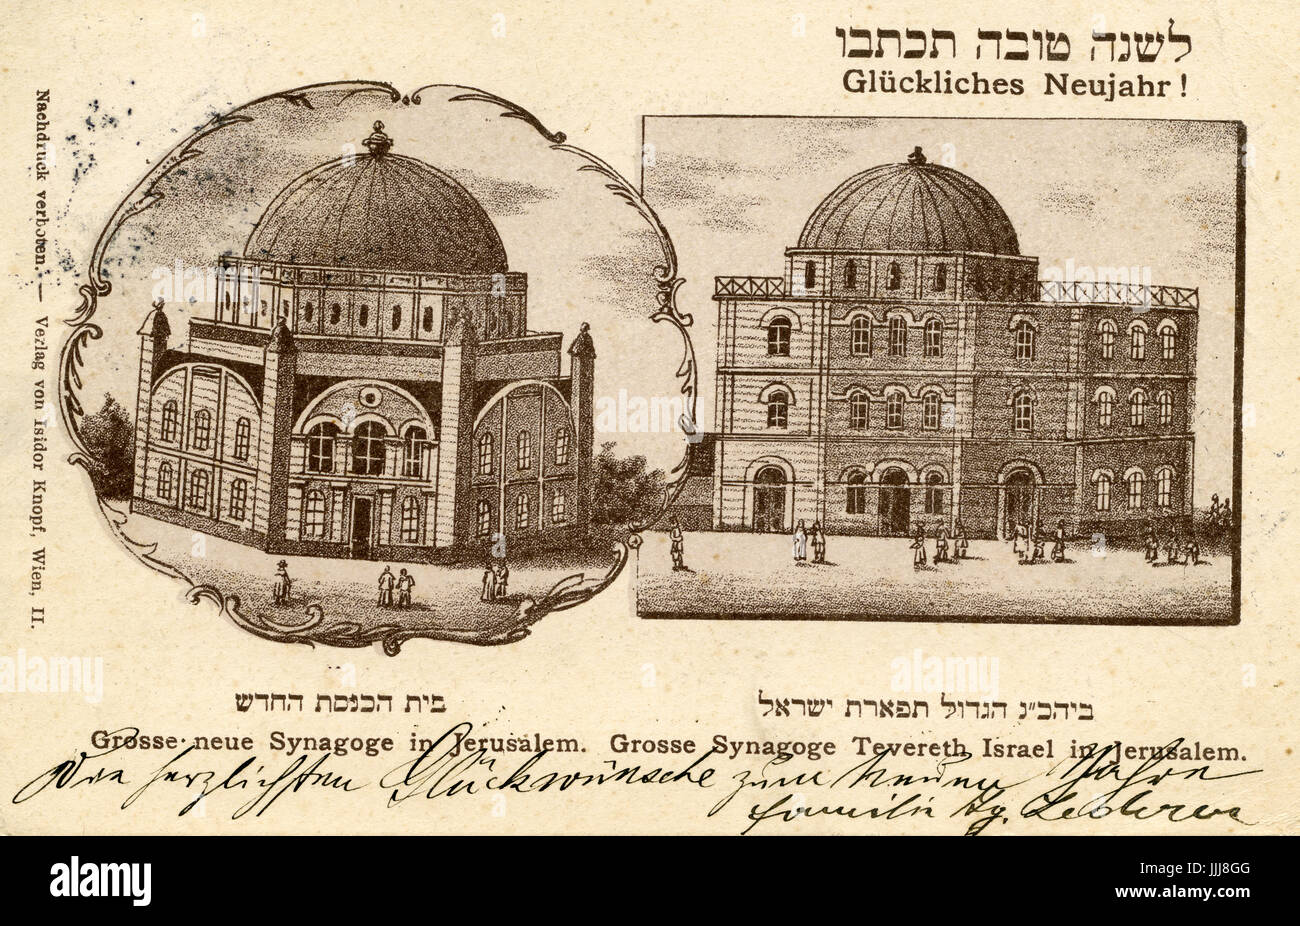 Hurva Synagogue, Jerusalem, new year's postcard, late 19th / early 20th century. also known as Hurvat Rabbi Yehudah he-Hasid (Ruin of Rabbi Judah the Pious. Rebuilt in 1864 and destroyed in 1948. Called in this postcard 'The New synagogue'. New year greetings card. Stock Photo